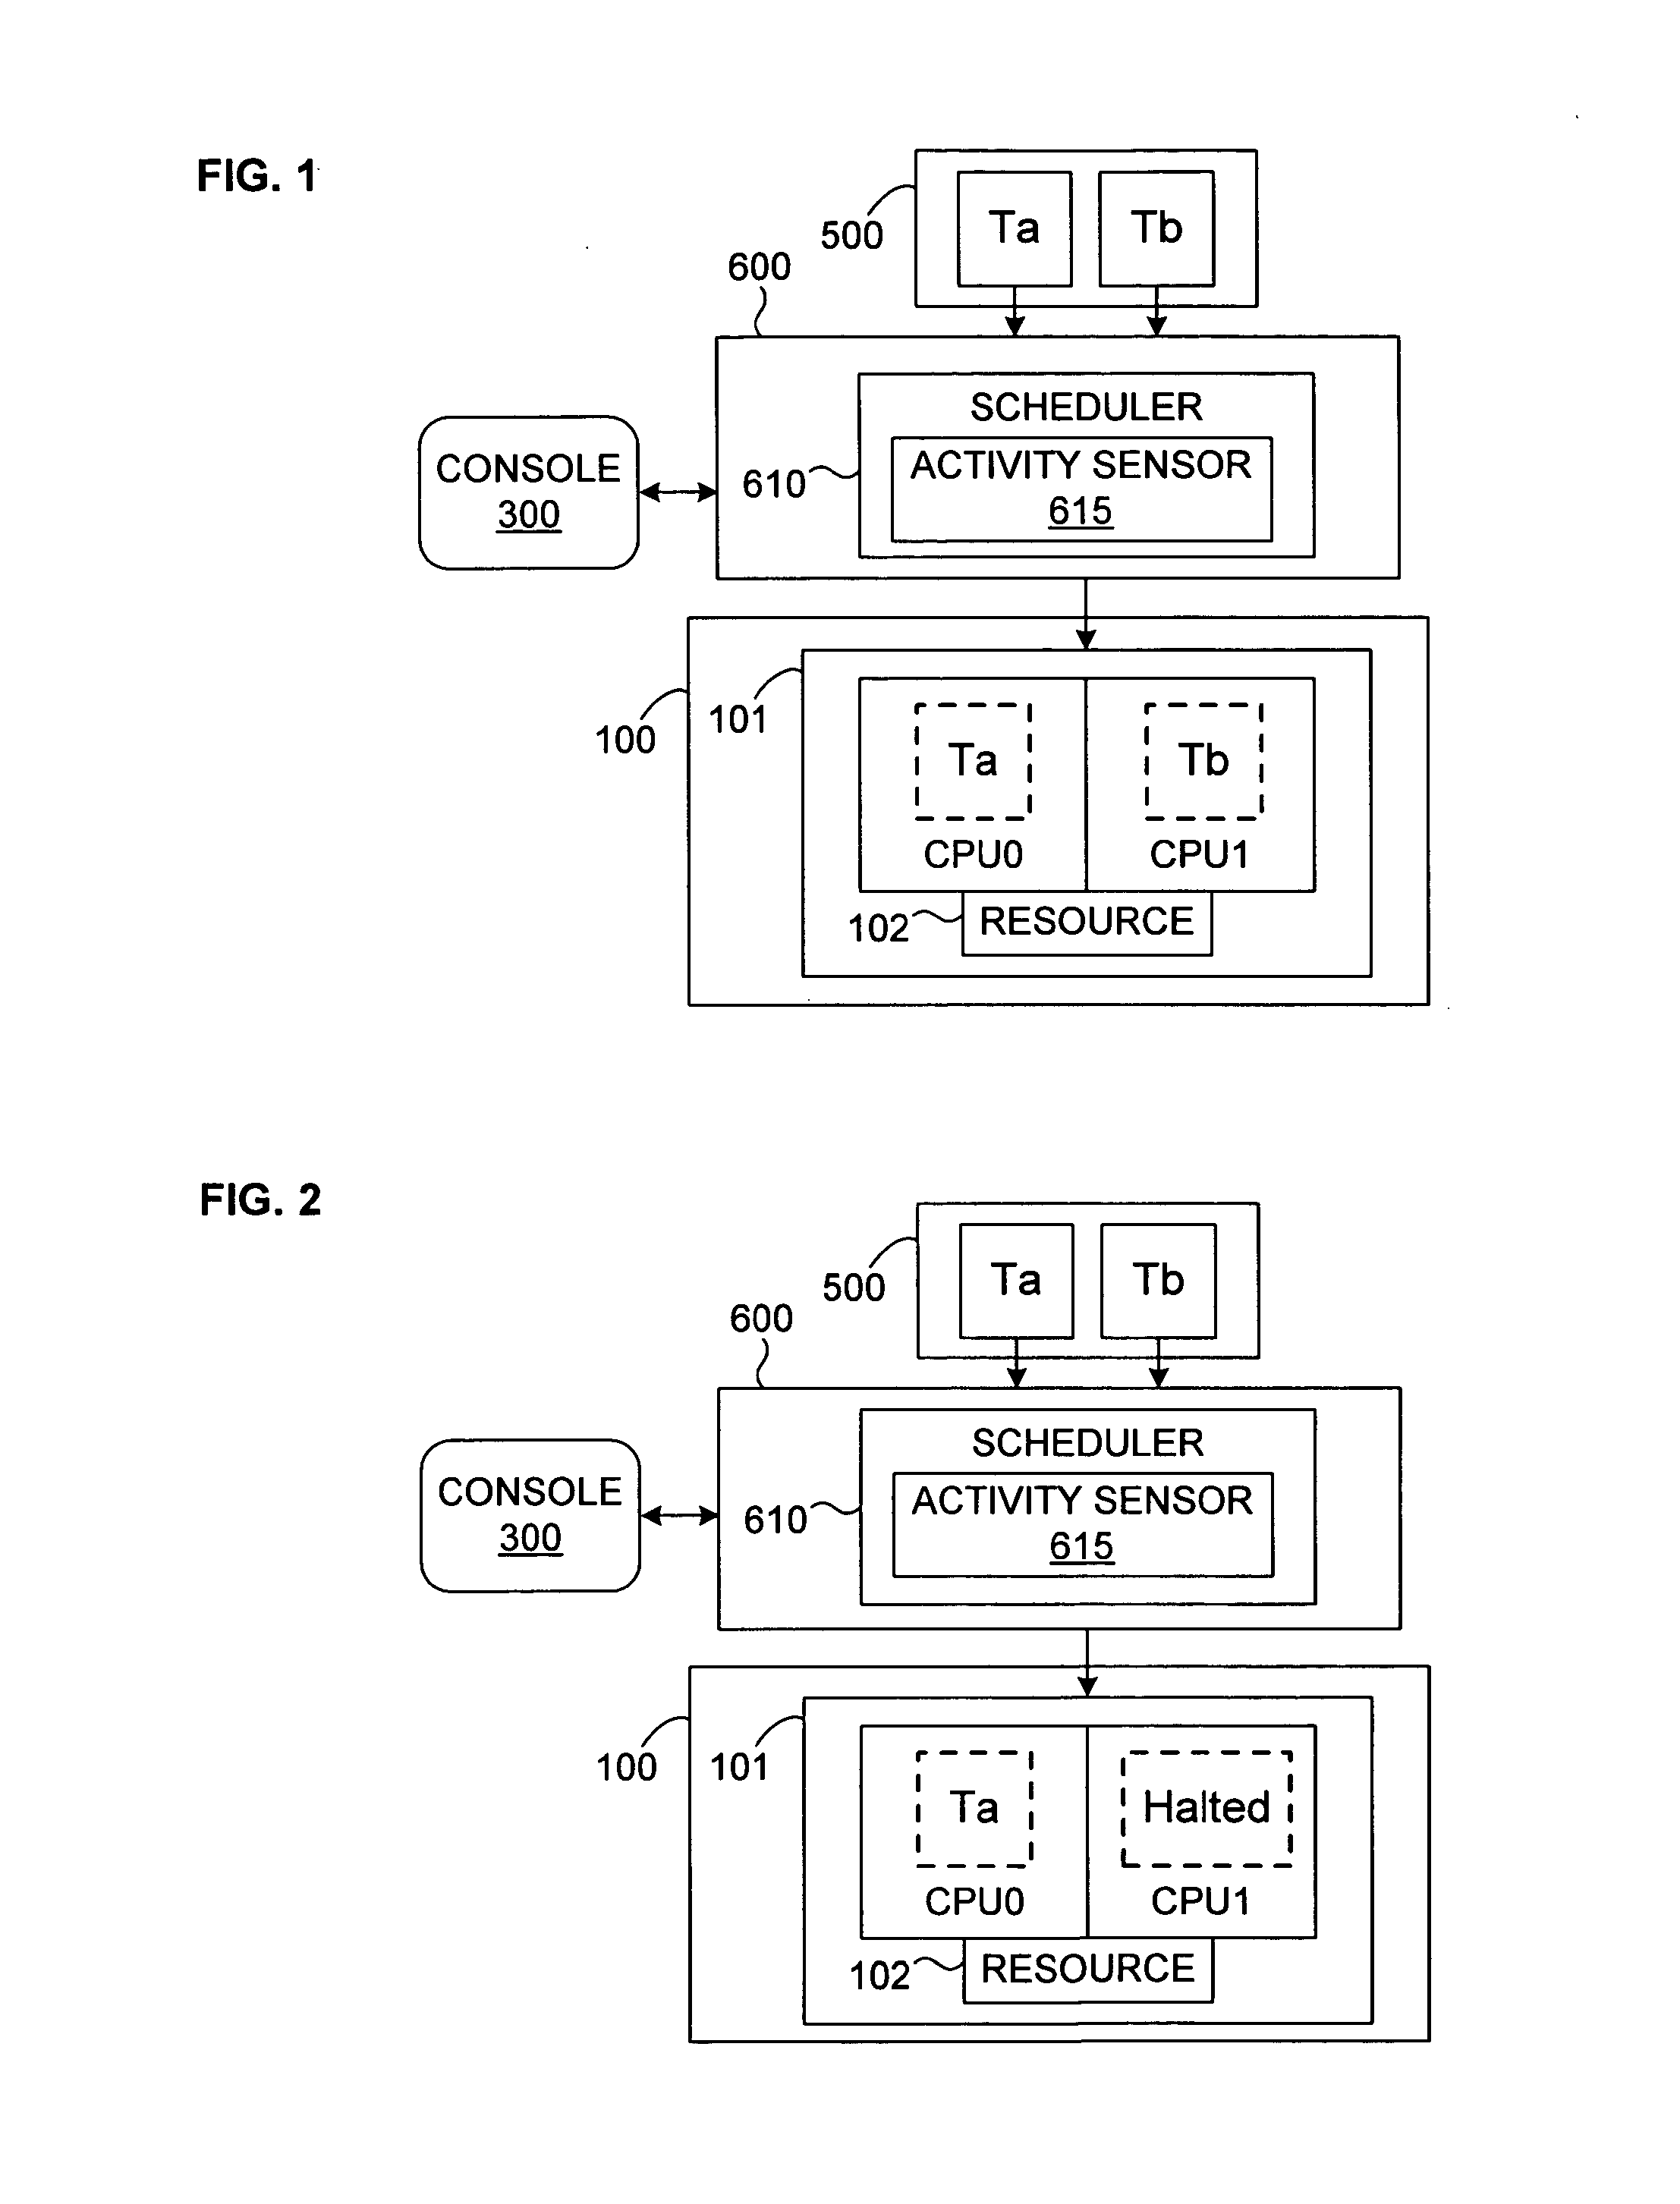 Mechanism for Scheduling Execution of Threads for Fair Resource Allocation in a Multi-Threaded and/or Multi-Core Processing System